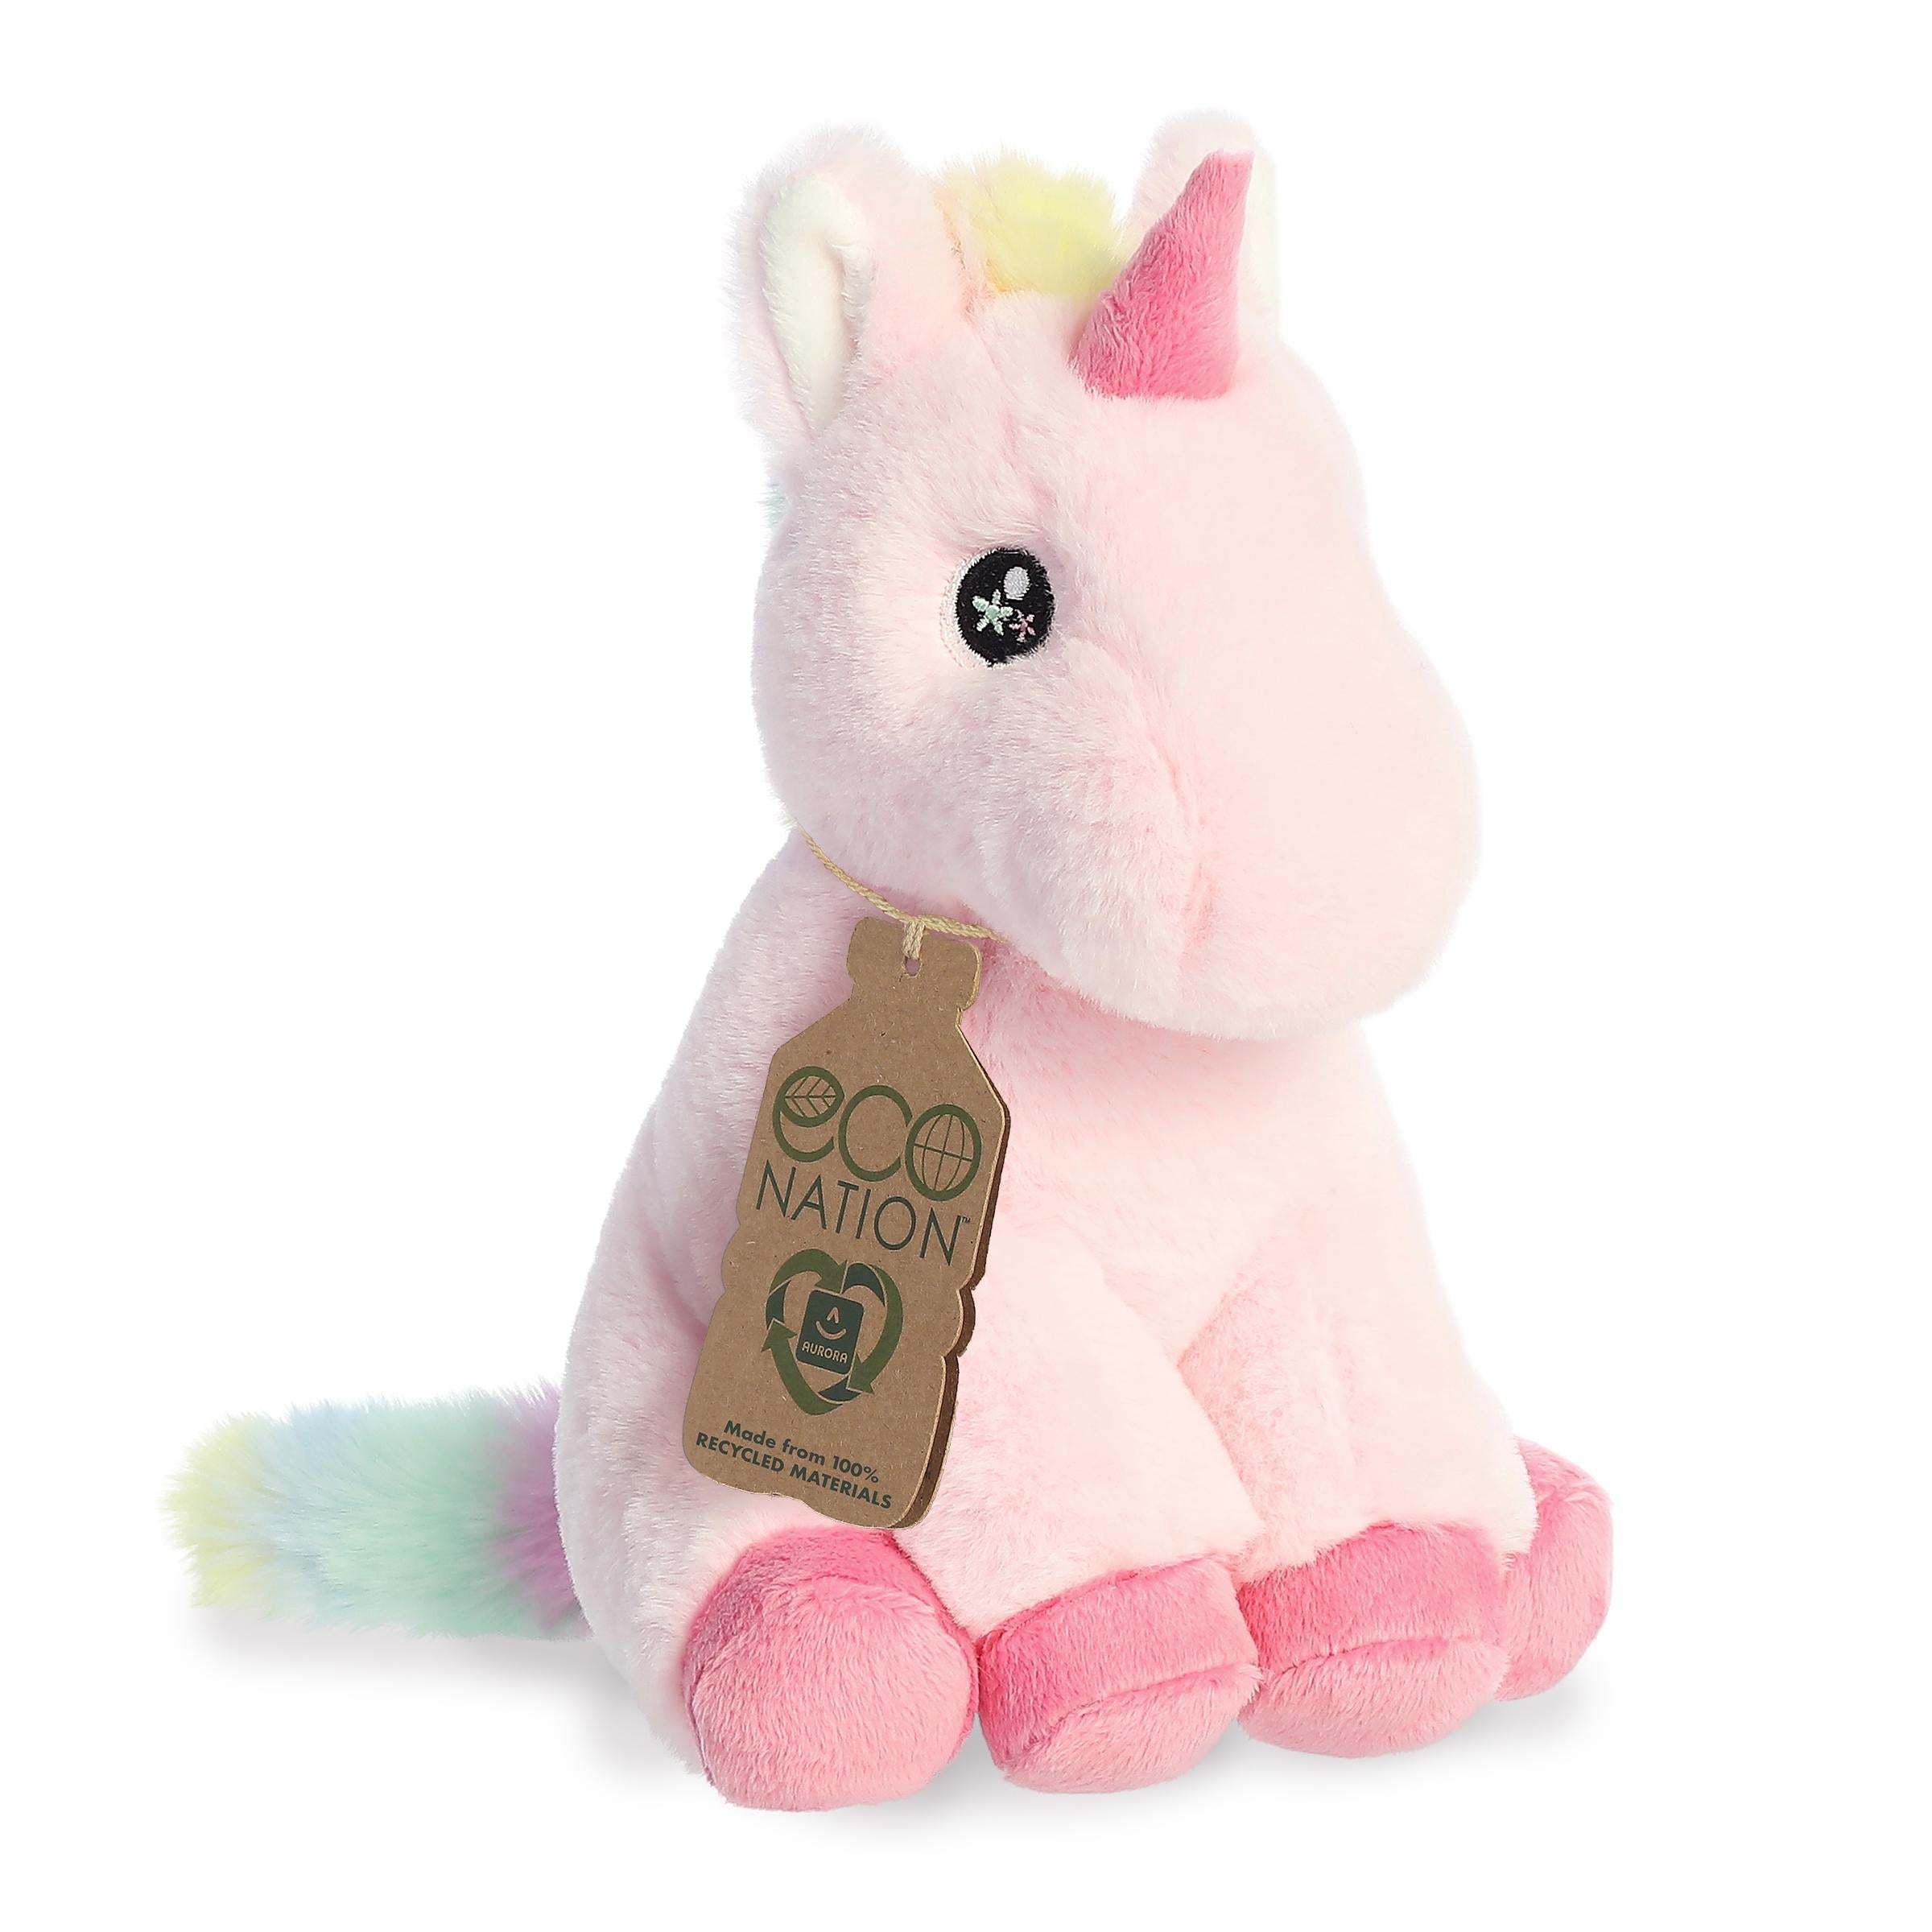 Magical unicorn plush with a bright pink body and rainbow tail, embroidered sparkling eyes, and an eco-nation tag